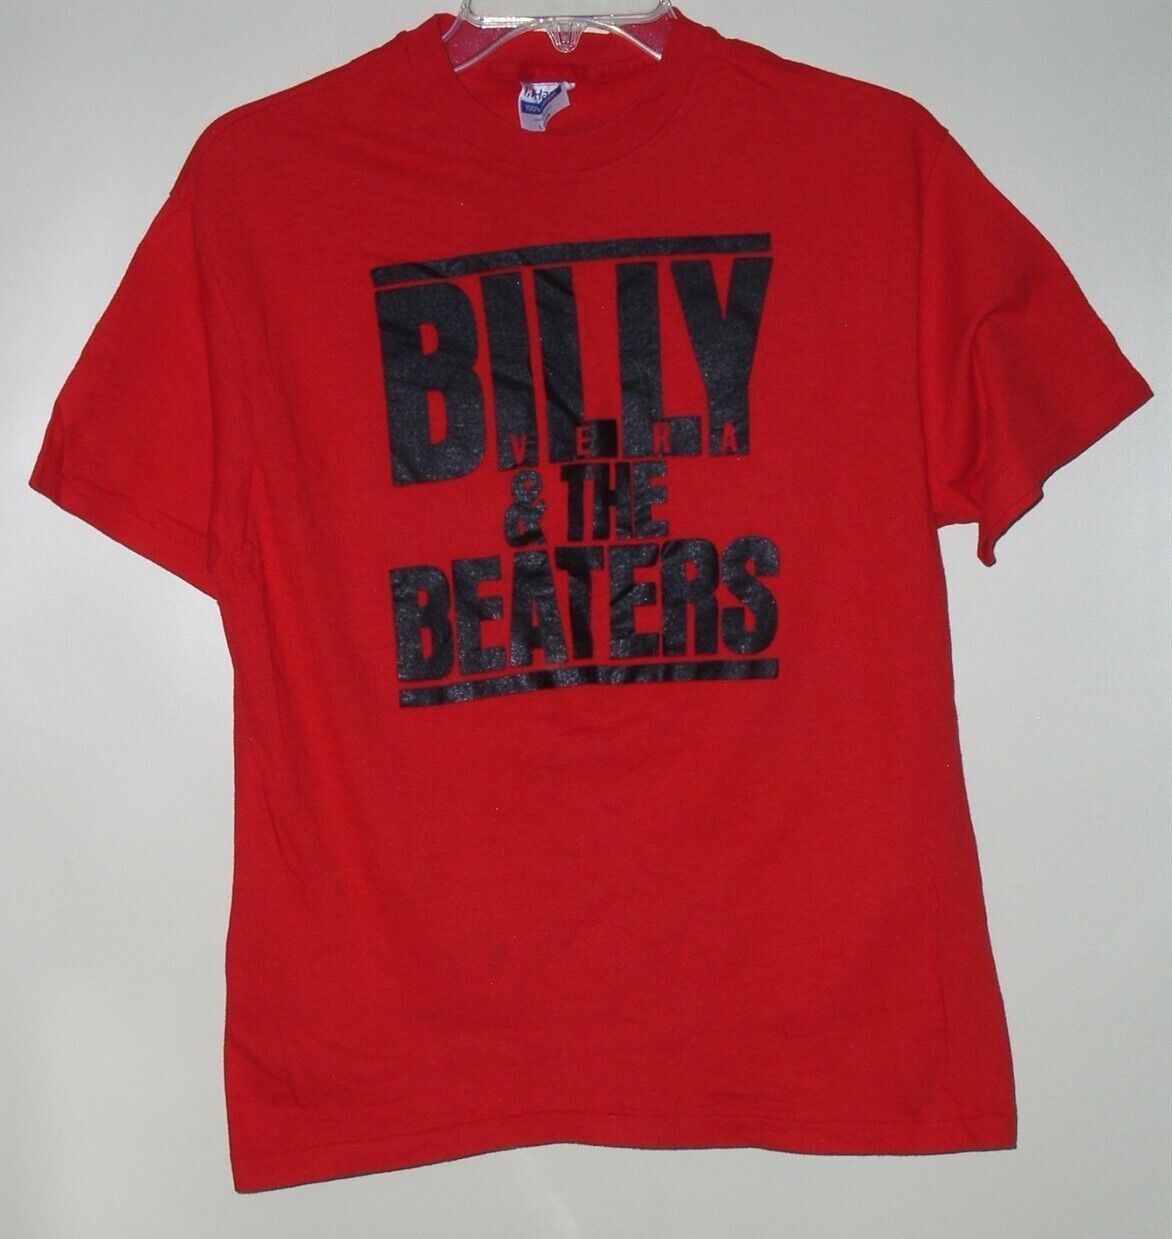 Primary image for Billy Vera And The Beaters Concert Tour Shirt Vintage Single Stitched Size Large